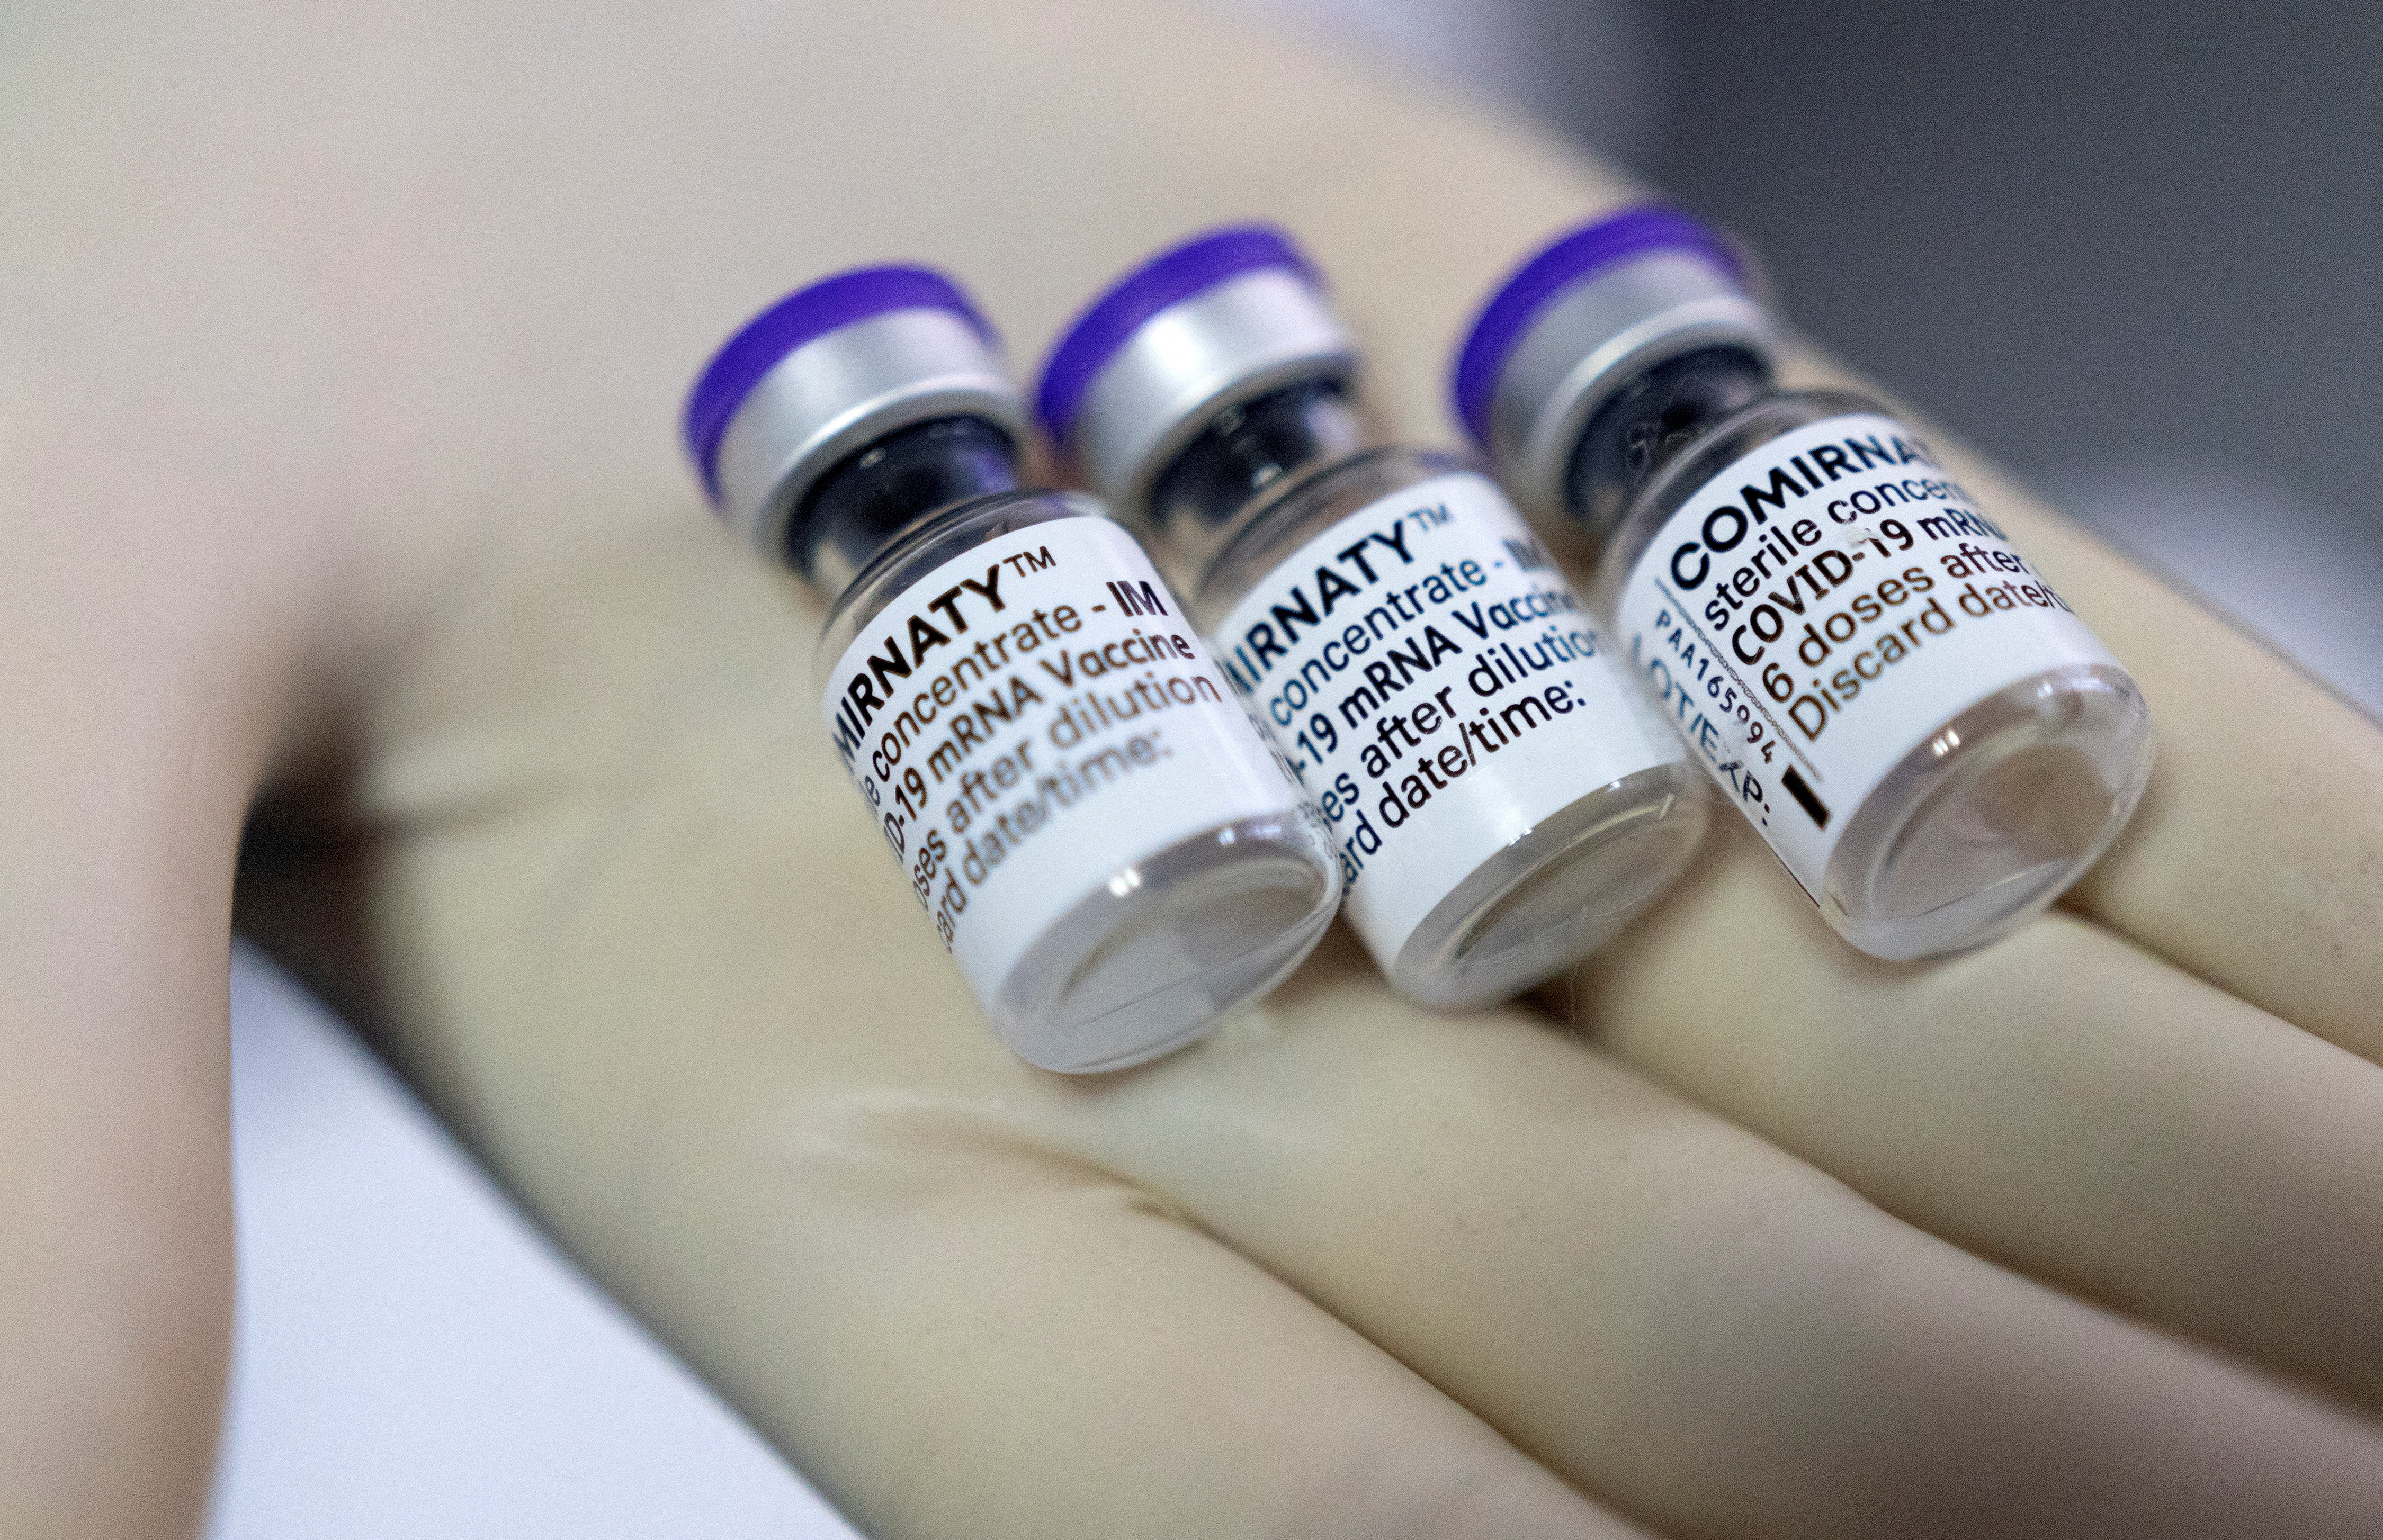 A doctor shows vials of Biontech-Pfizer's Comirnaty vaccine against COVID-19 at the Institute for Health and Food Safety of Zenica, Bosnia and Herzegovina, December 16, 2021. REUTERS/Dado Ruvic